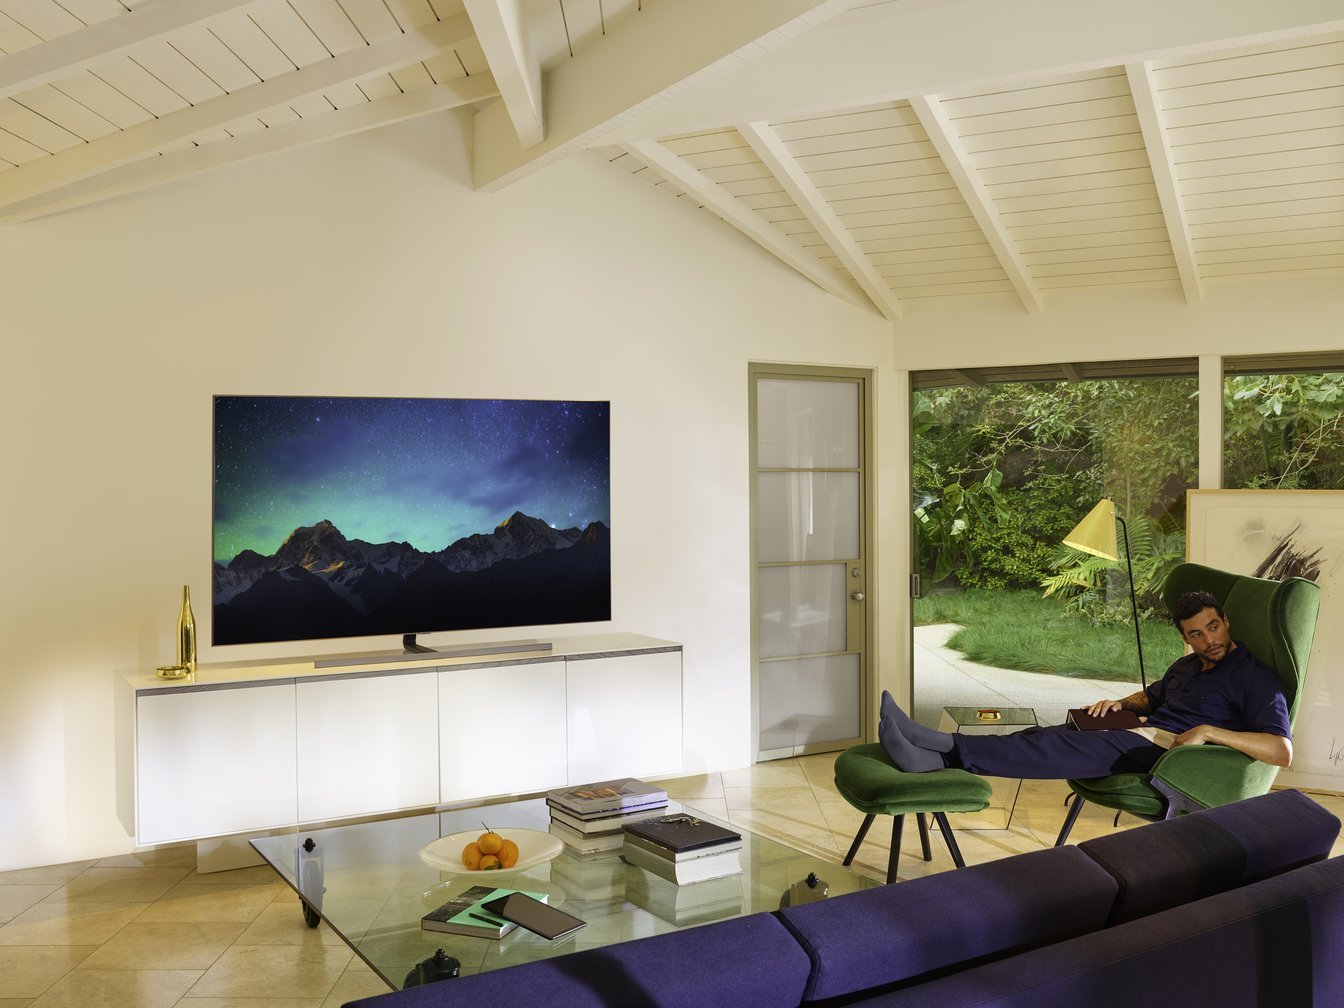 Samsung Announces UK Release Date for its 2019 QLED TVs